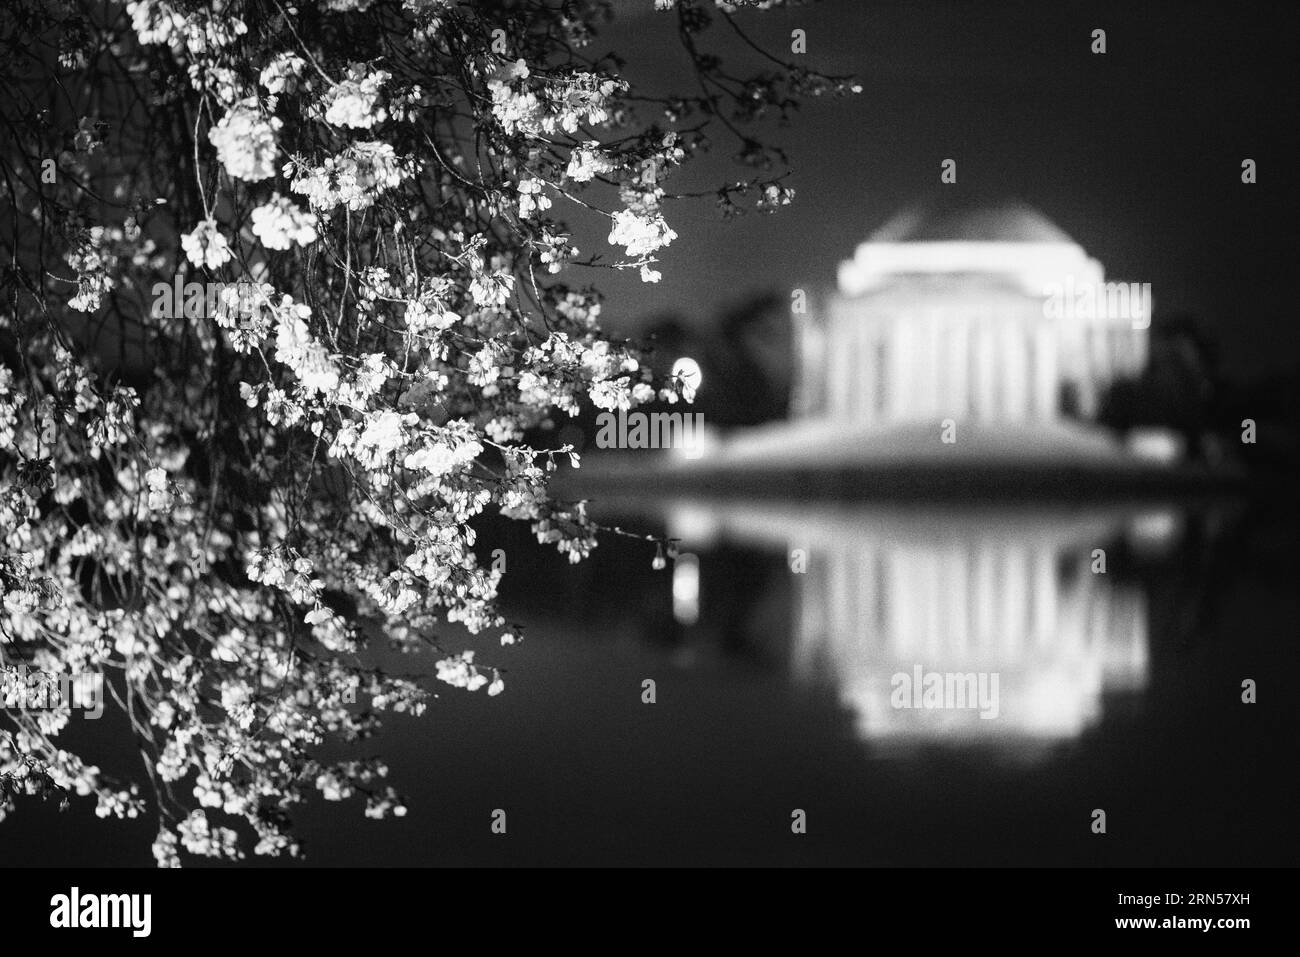 WASHINGTON DC, United States — The Jefferson Memorial stands framed by vibrant cherry blossoms, marking the onset of spring in the capital. These blossoms, a gift from Japan in 1912, provide a picturesque setting to the memorial dedicated to the third U.S. president, Thomas Jefferson, highlighting the melding of natural beauty and American history. Stock Photo